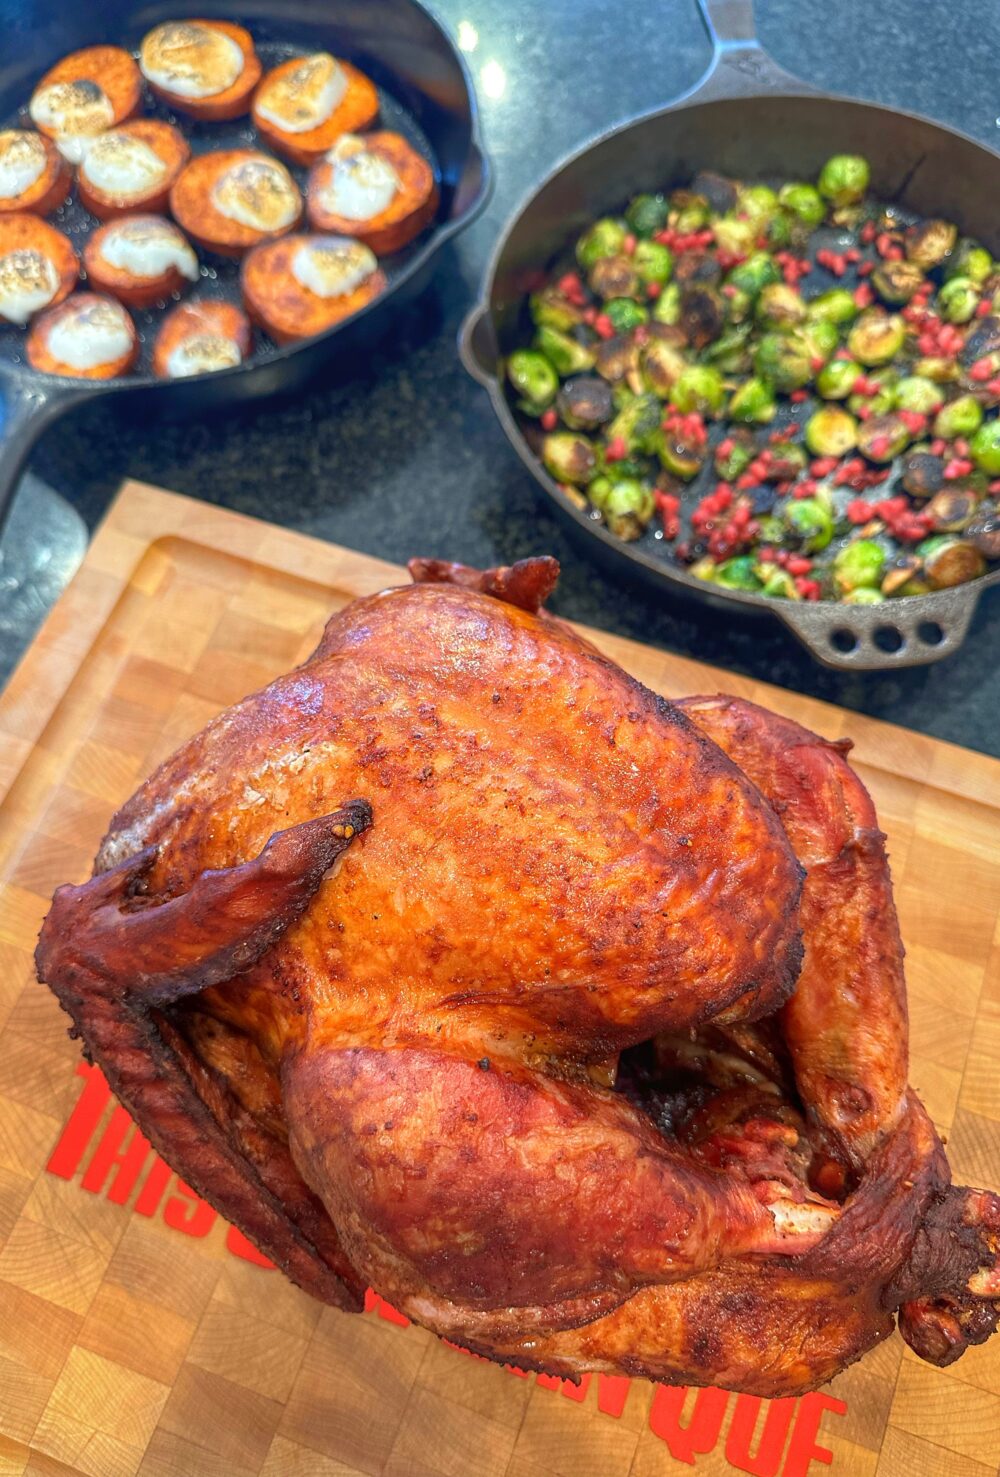 Turkey and sides finished